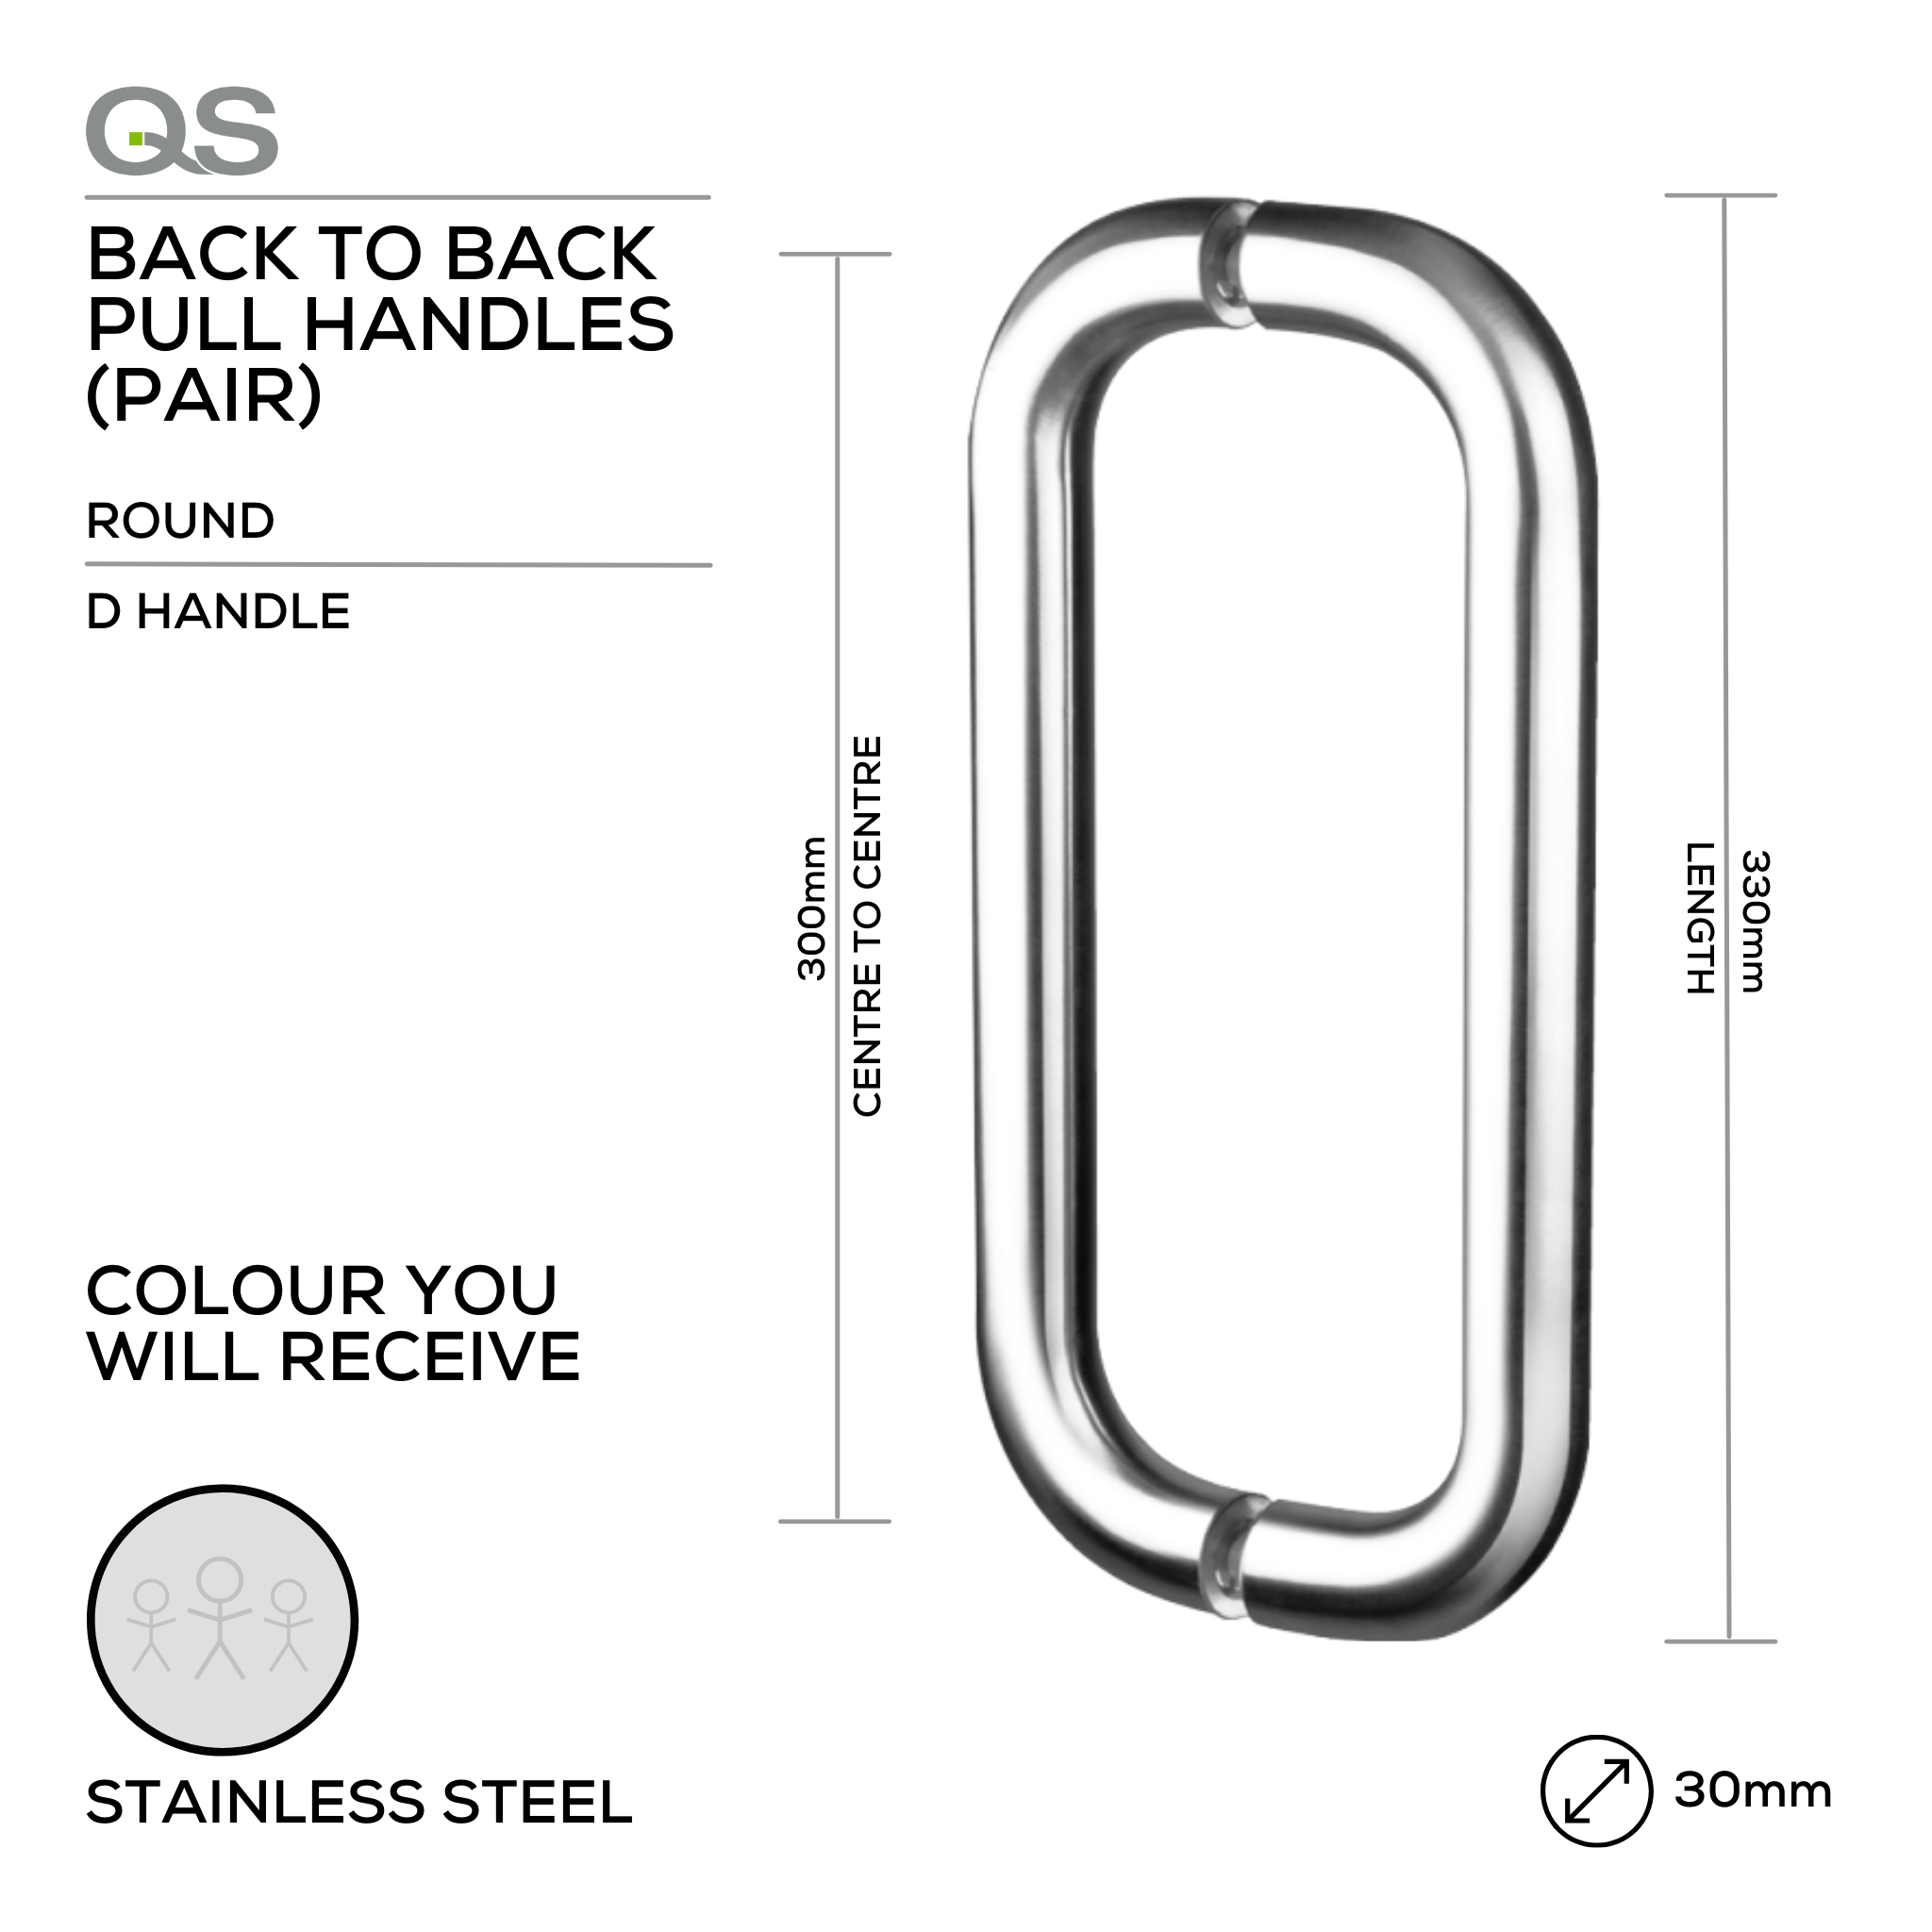 QS2201/1 D Handle, Pull Handle, Round, D Handle, BTB, 30mm (Ø) x 330mm (l) x 300mm (ctc), Stainless Steel, QS